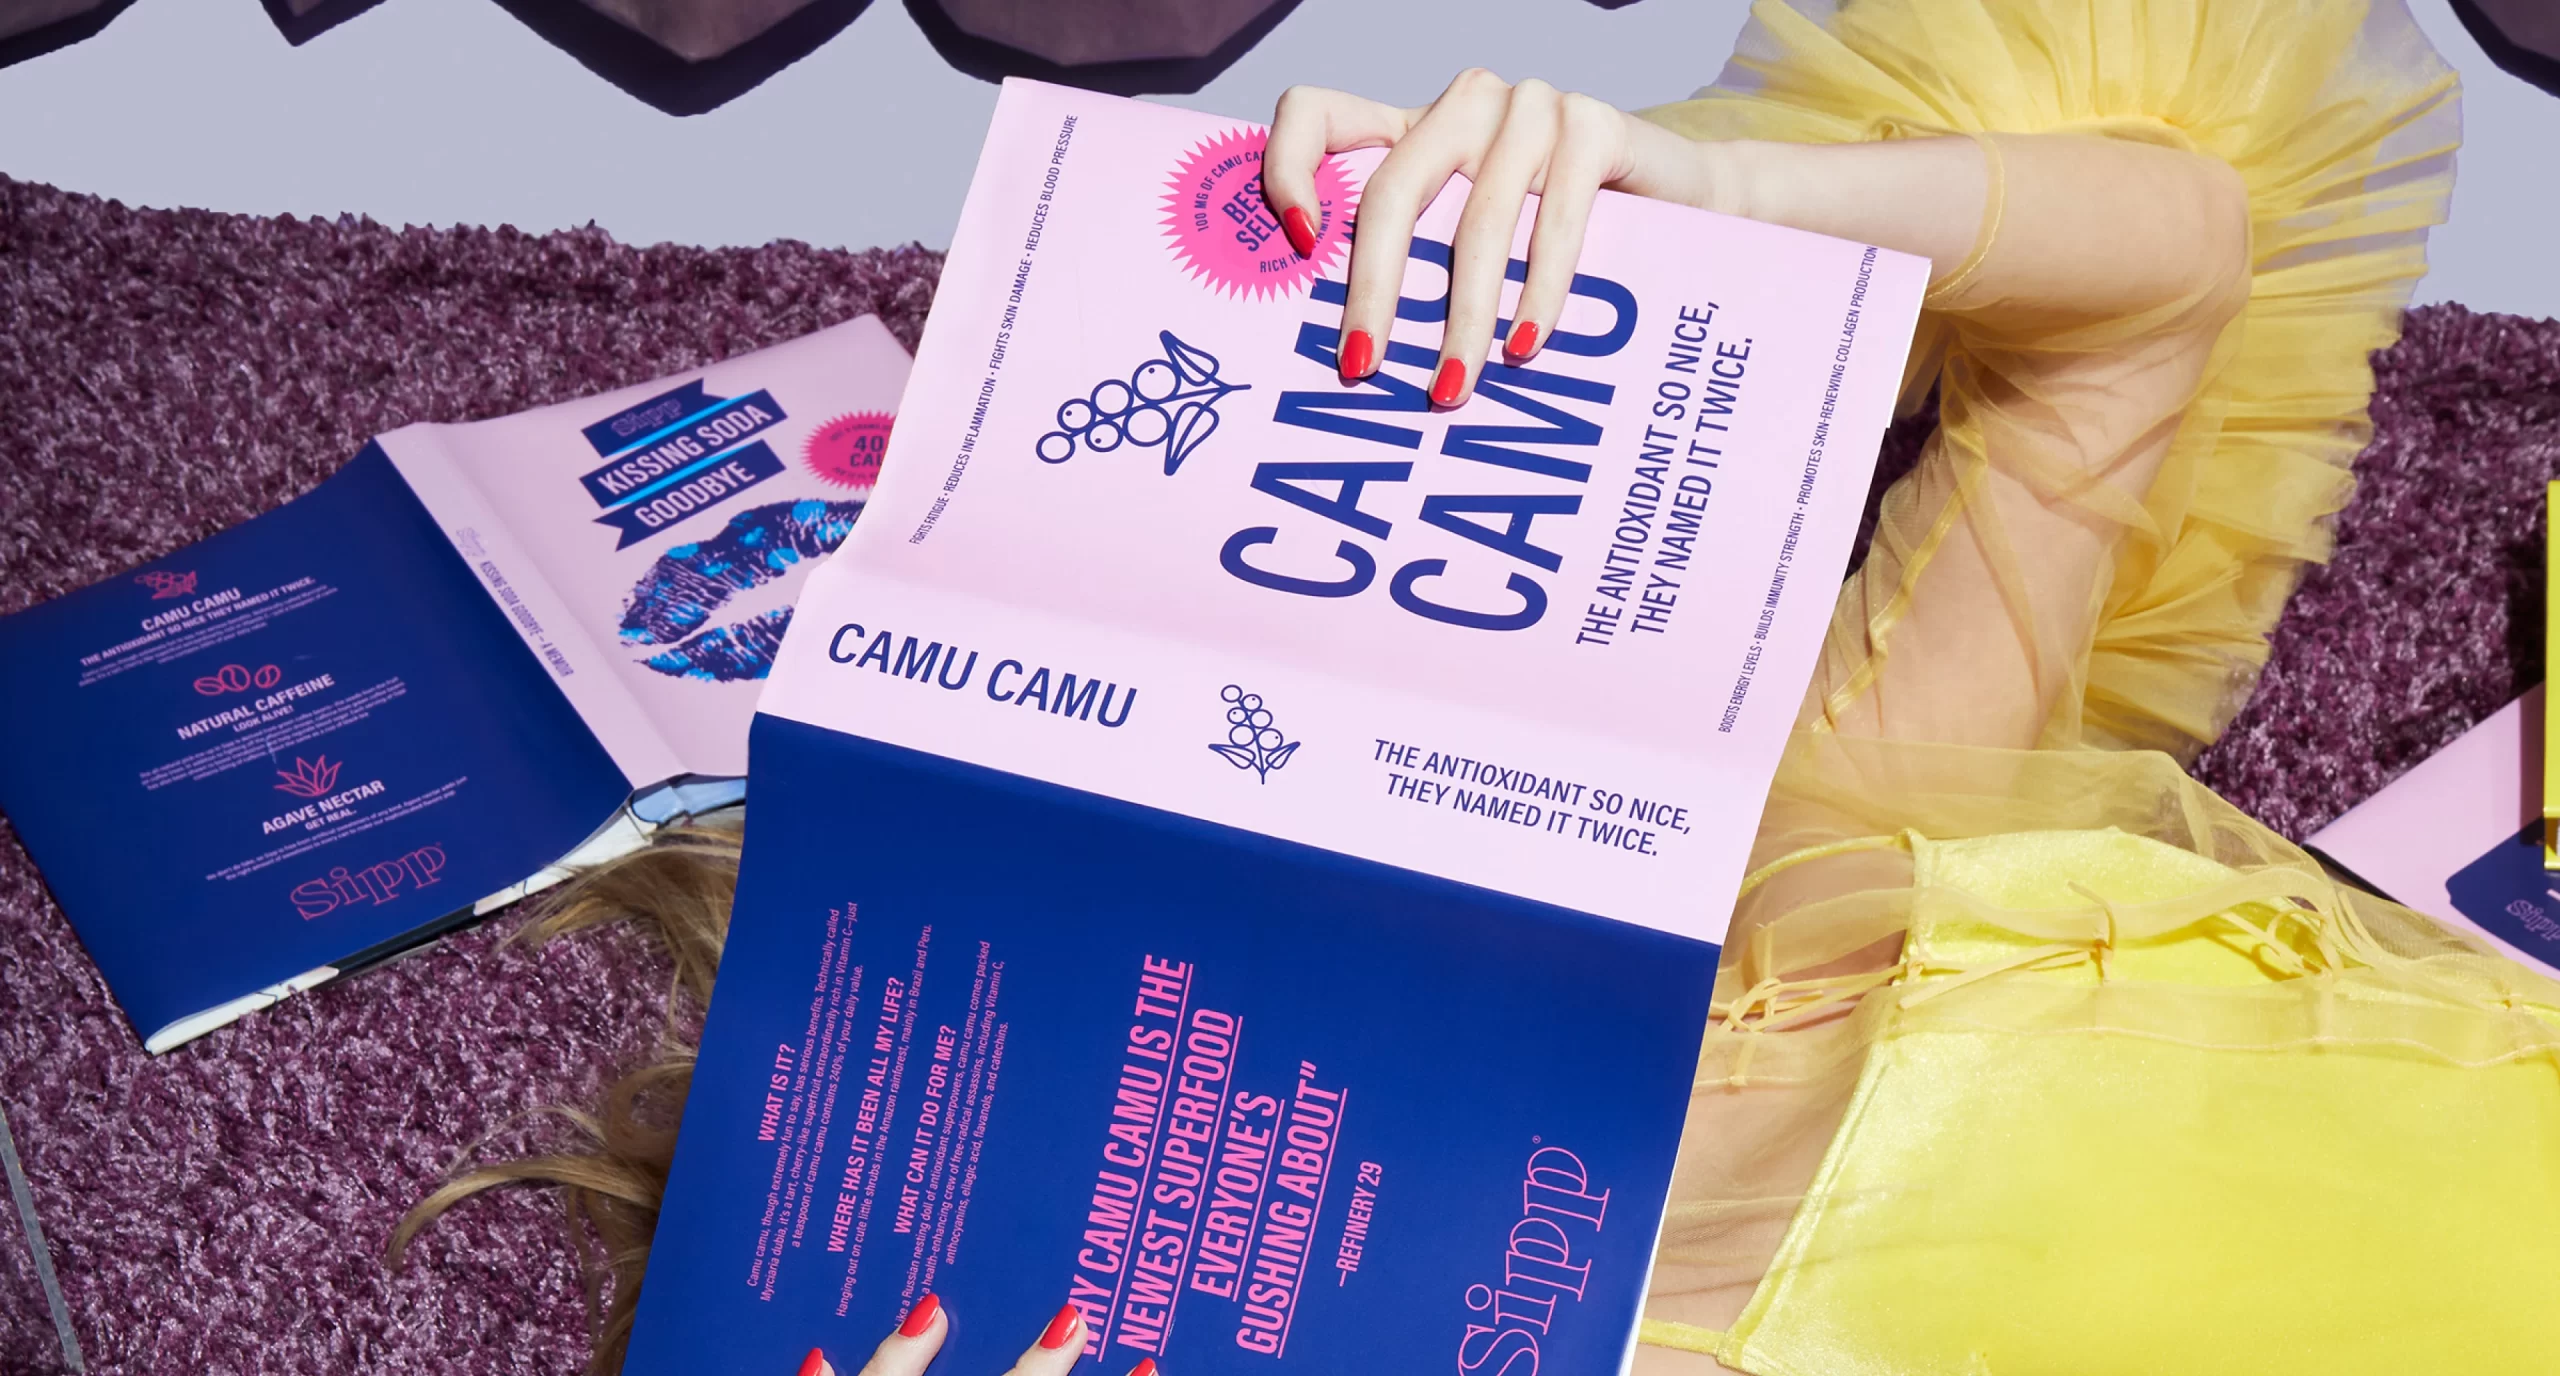 Woman with red nails reading a colorful book about the Sipp antioxidant Camu Camu